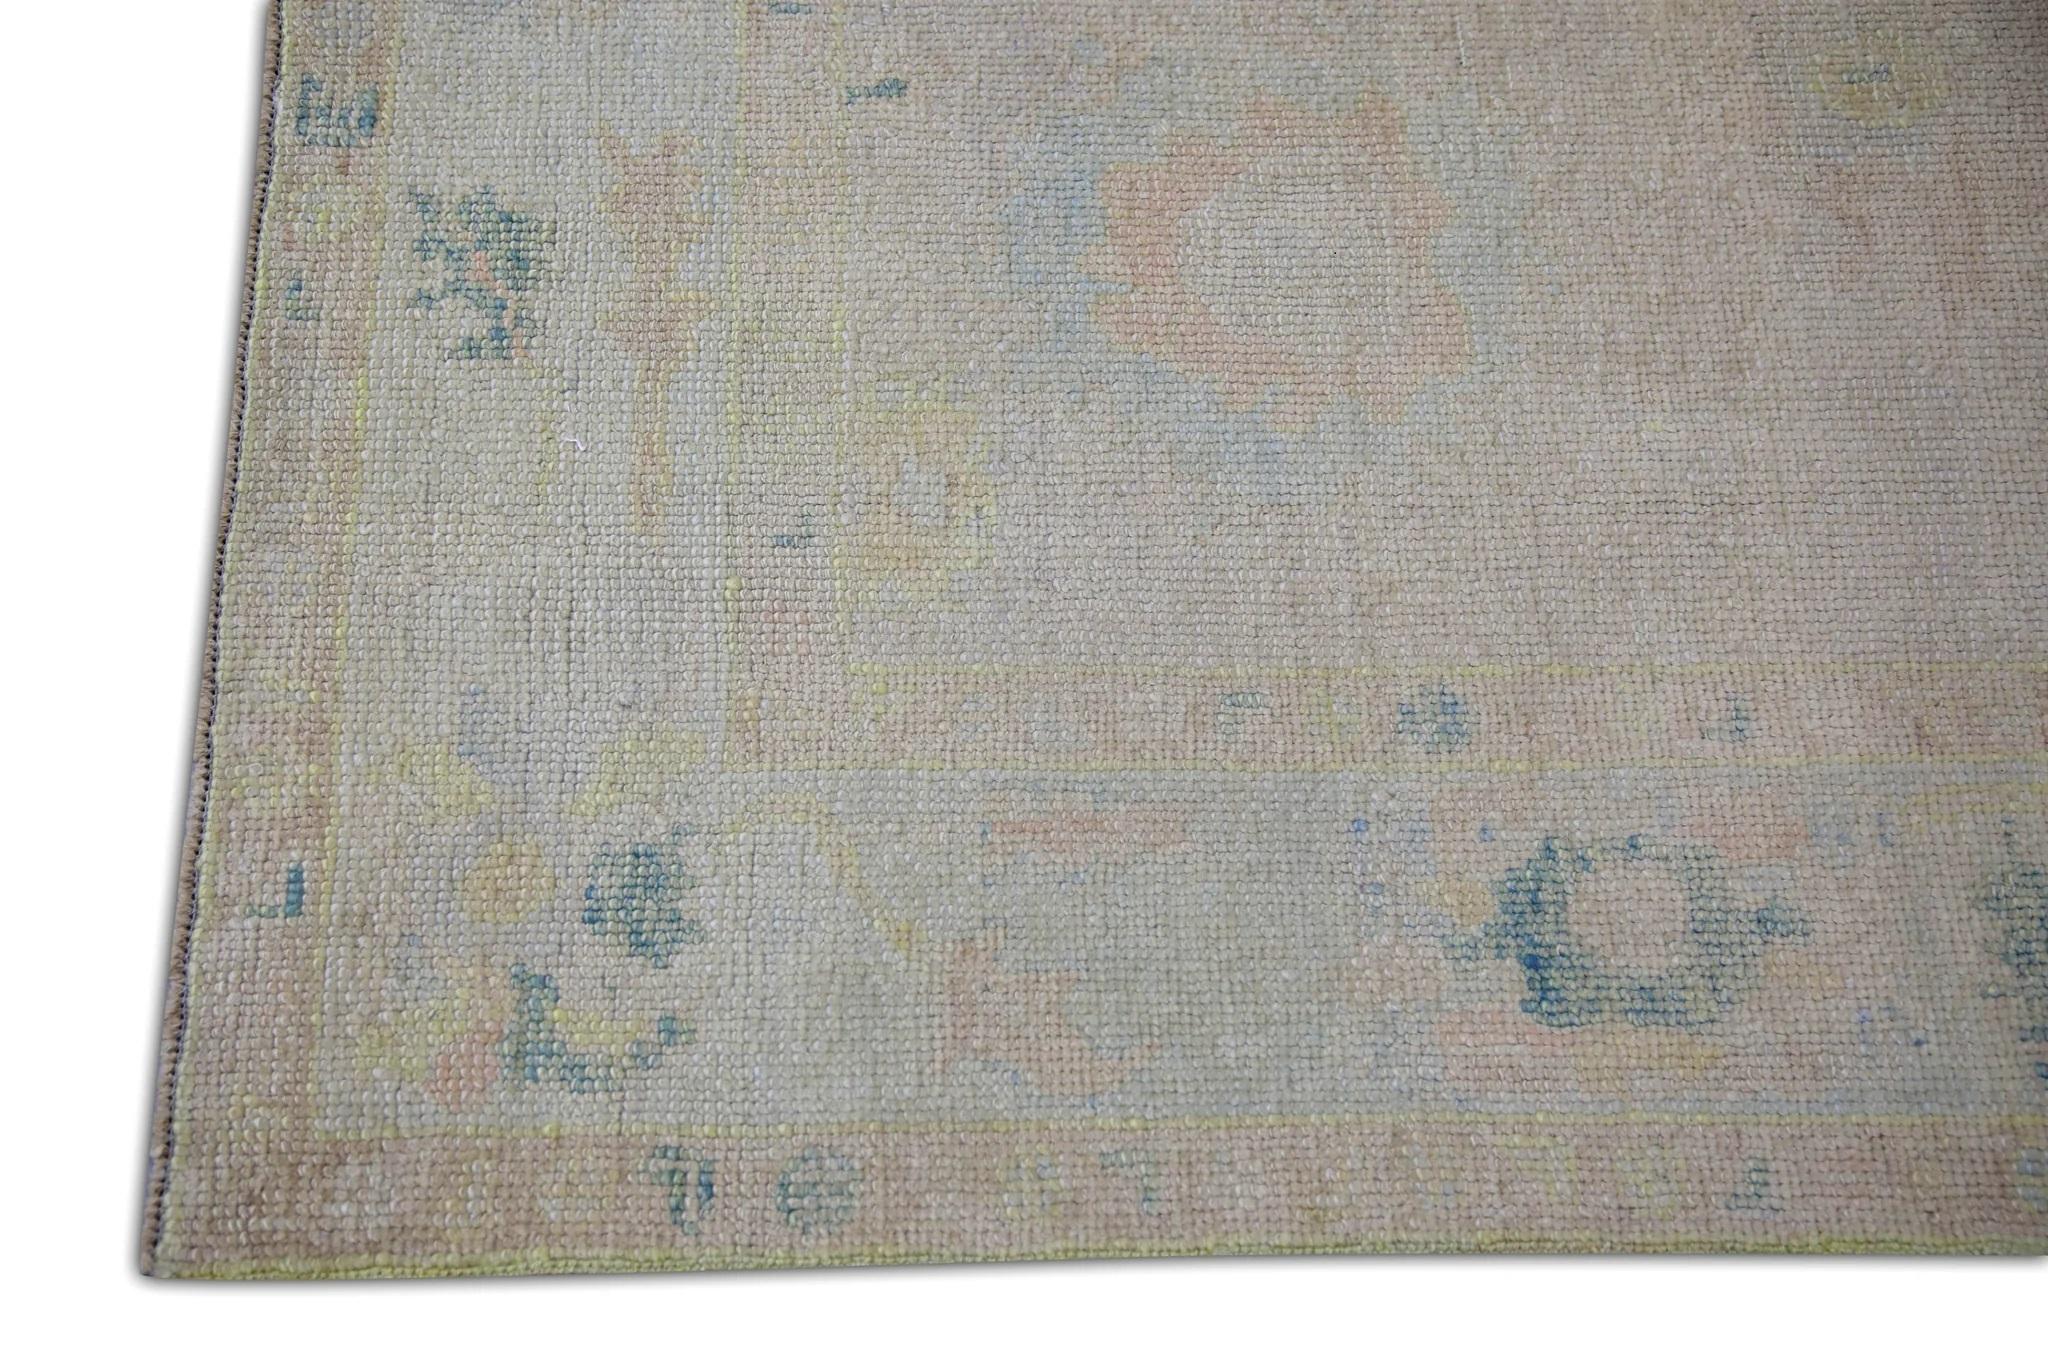 Vegetable Dyed Floral Handwoven Wool Turkish Oushak Rug in Colorful Pastel Shades 5'1